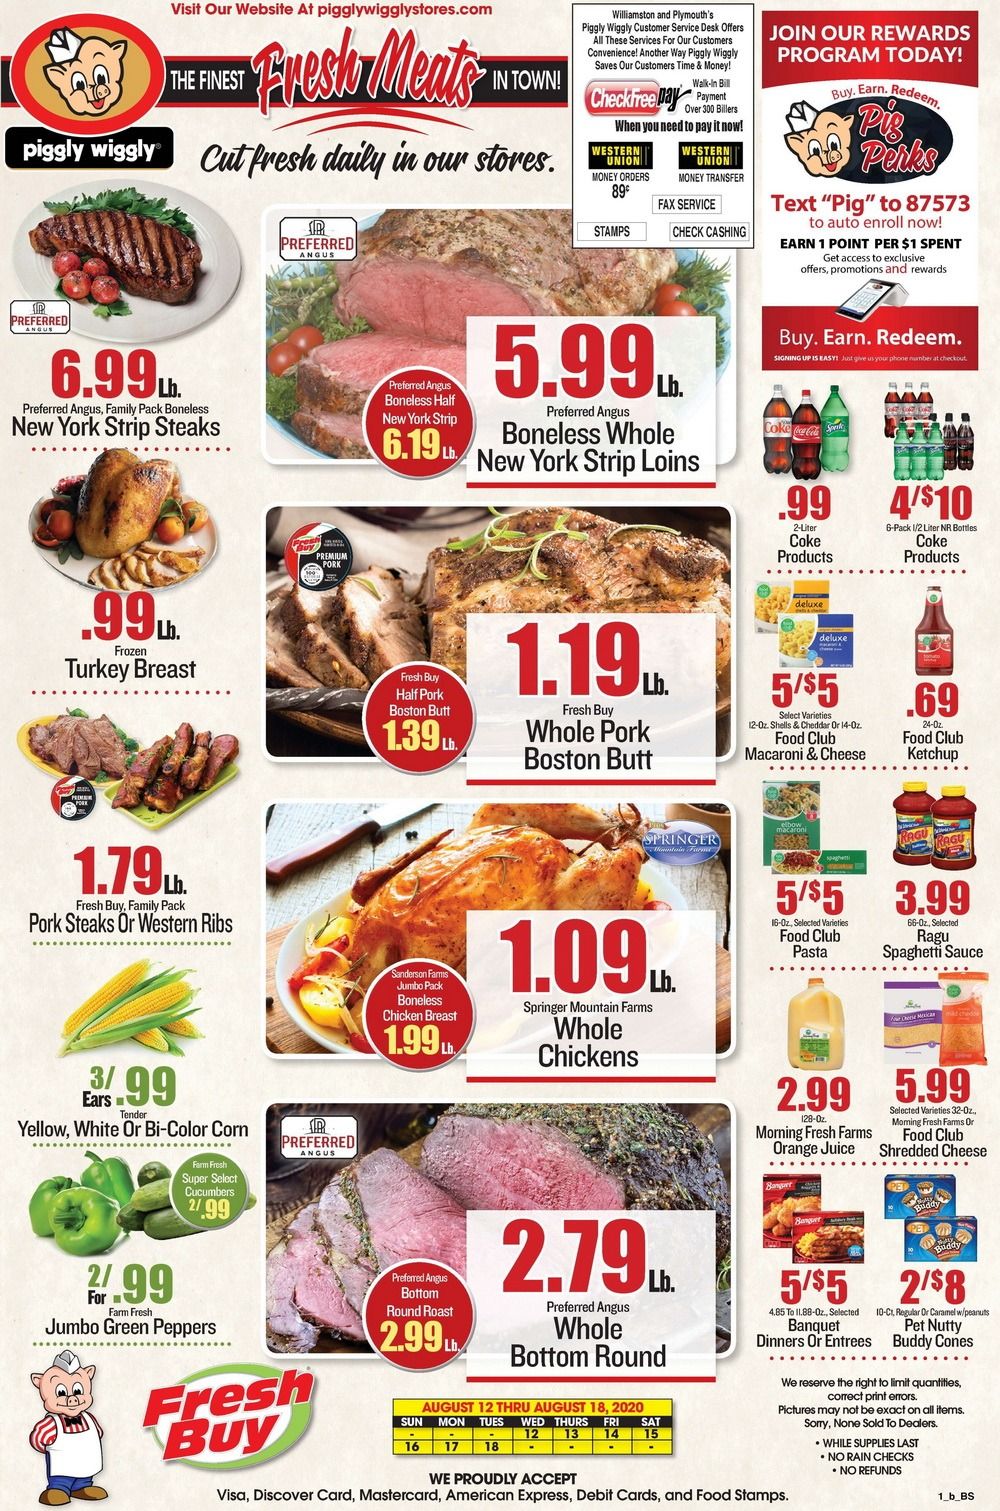 Piggly wiggly weekly ad silopetrade